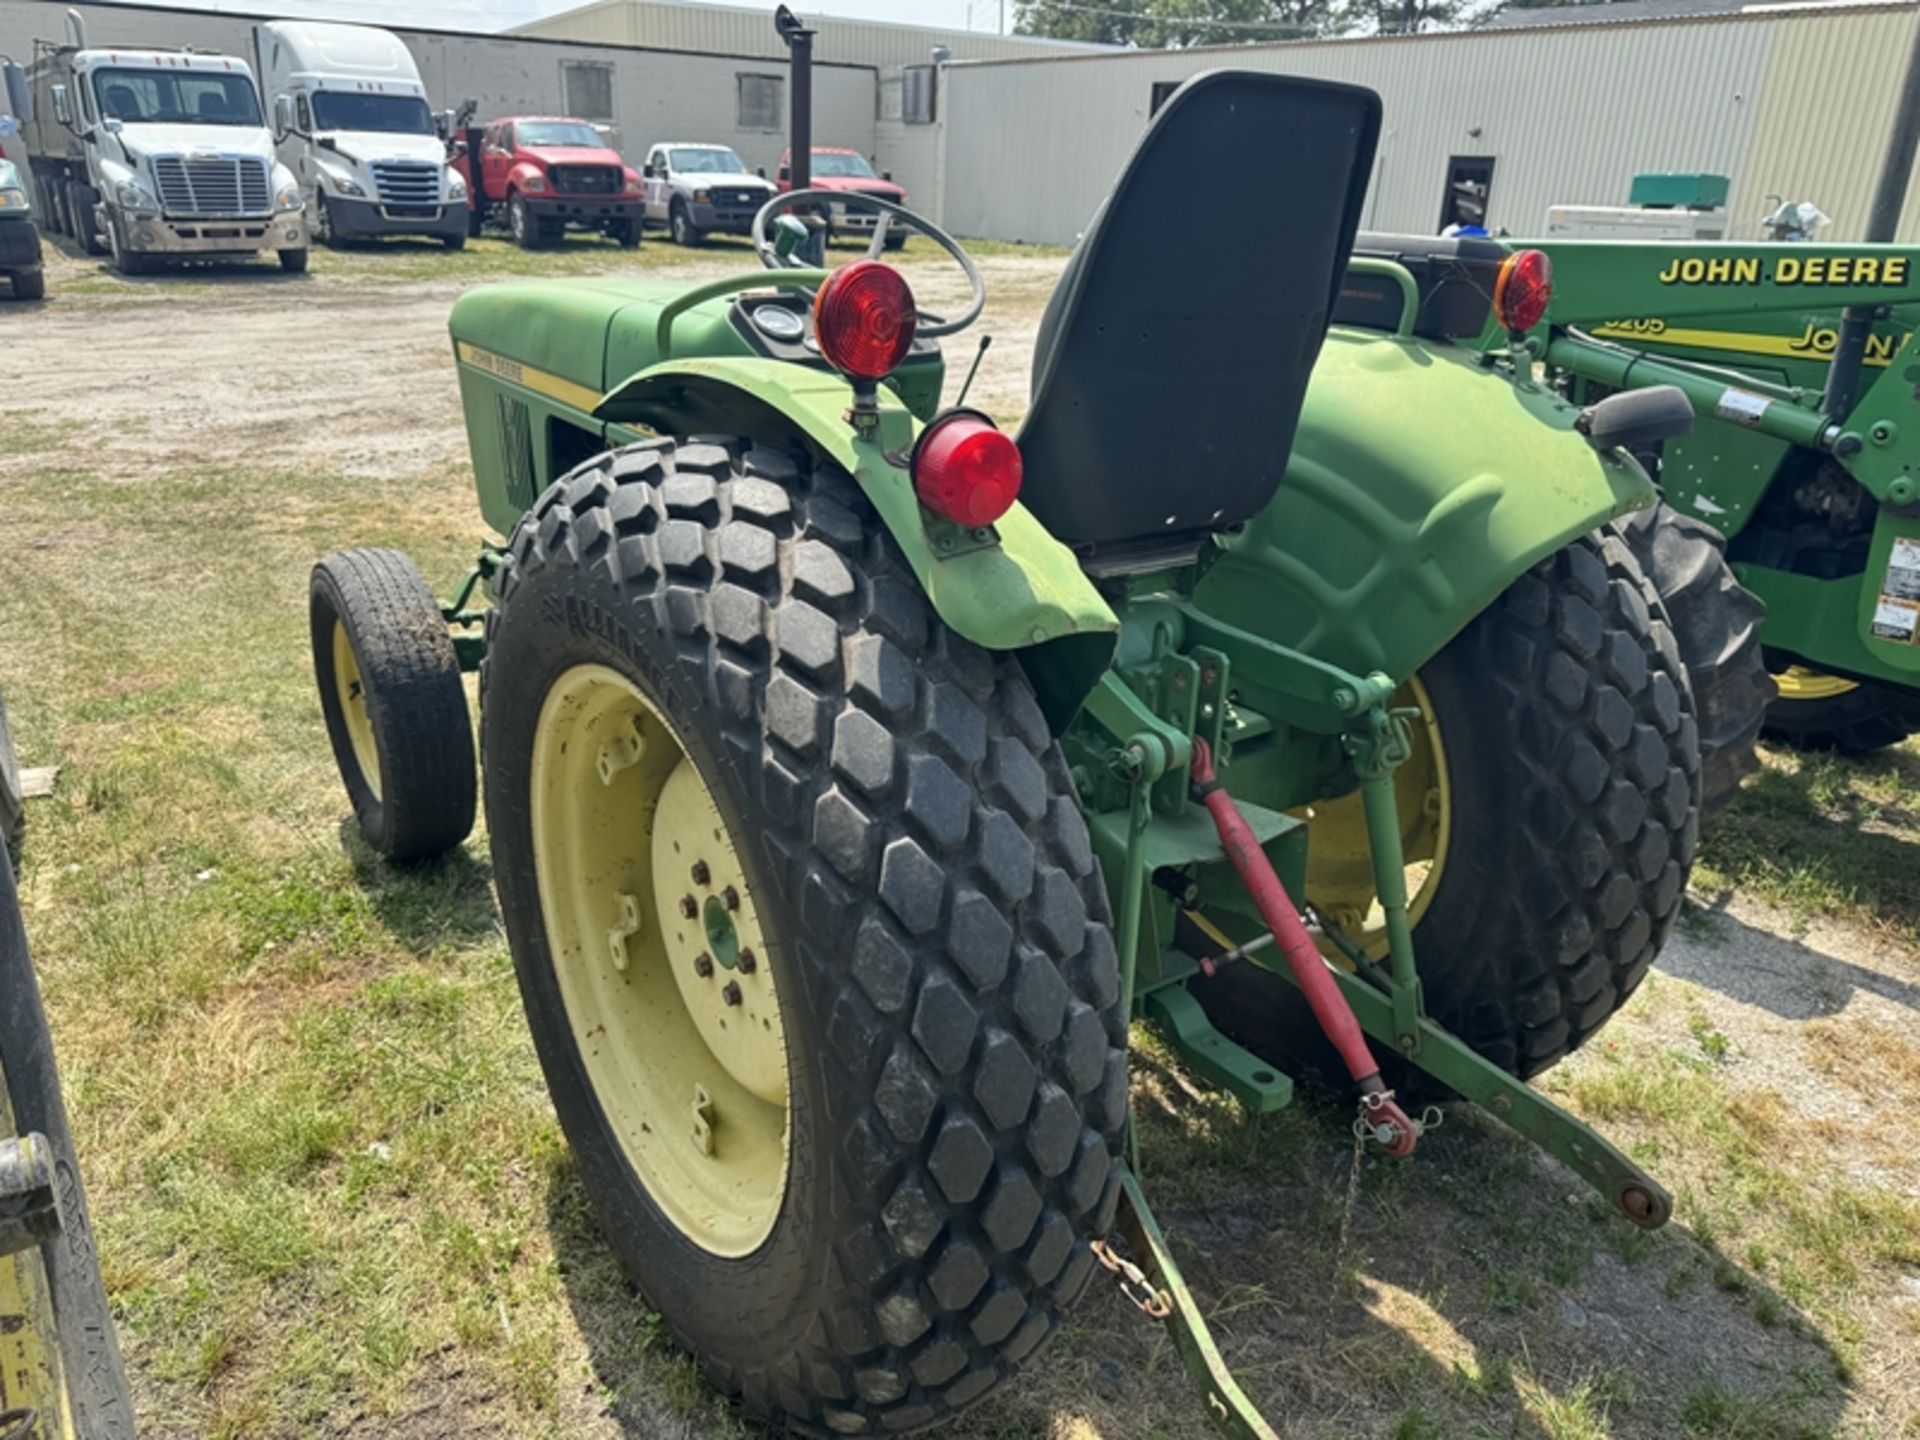 JOHN DEERE 950 with turf tires – 1285 hours showing - Image 4 of 4